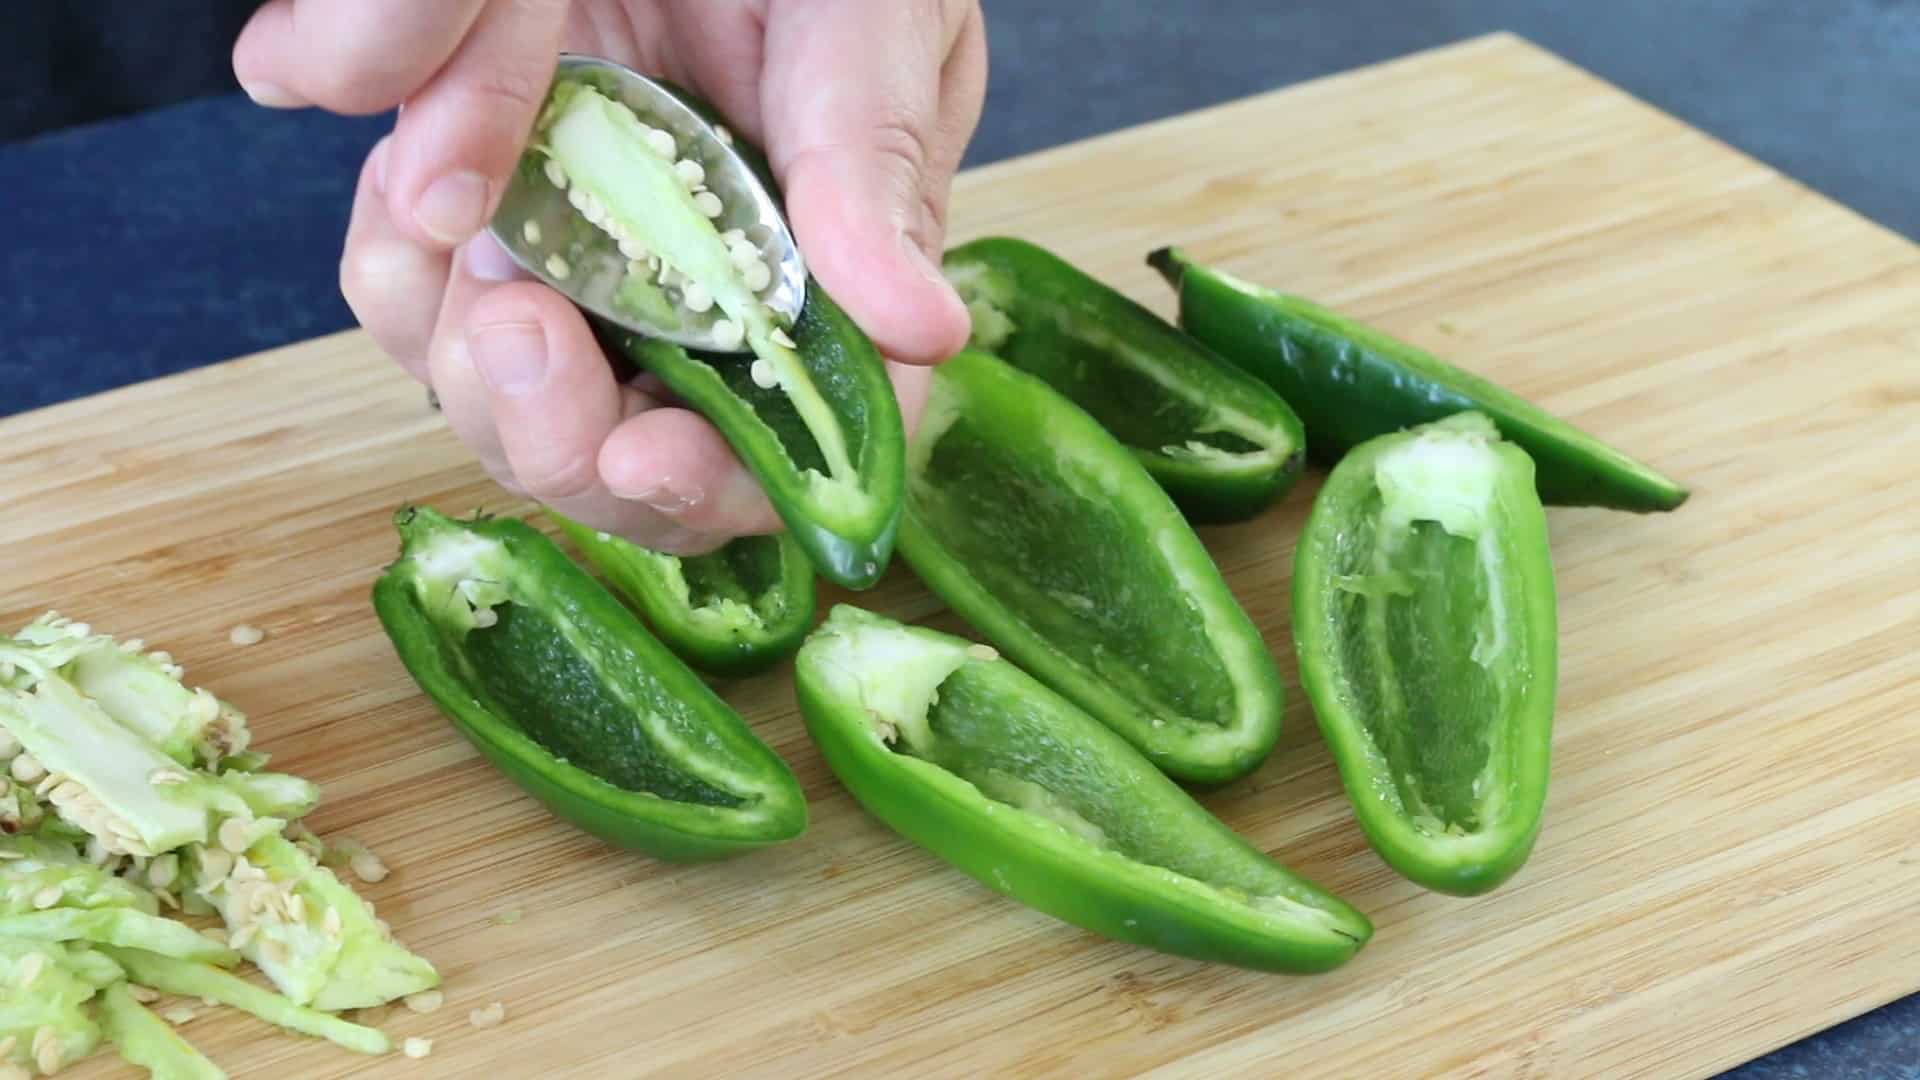 Coring Jalapeno Peppers for our Cream Cheese Jalapeno Poppers